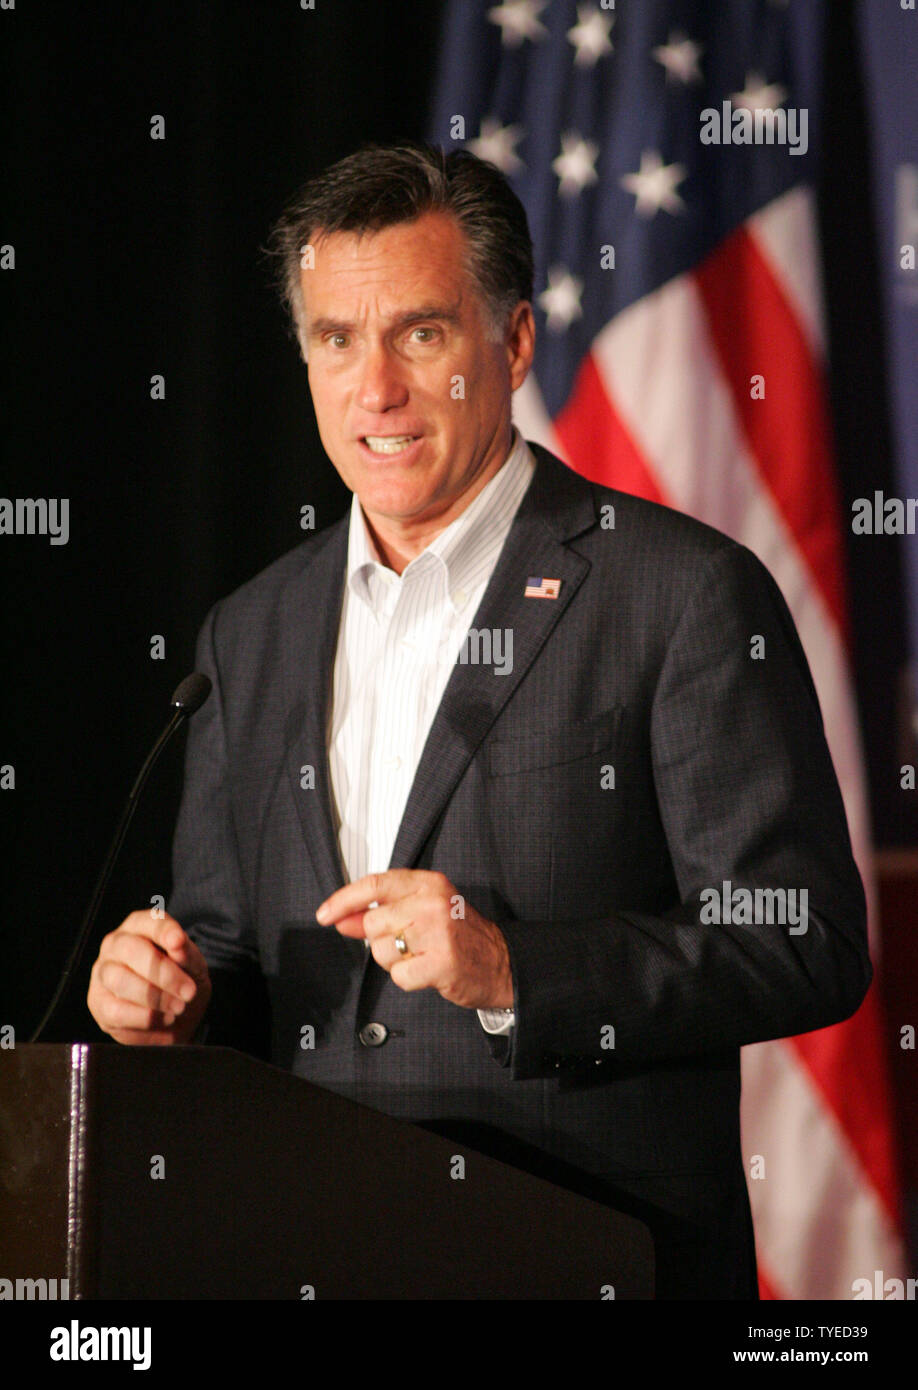 Republican Presidential hopeful Mitt Romney speaks at the Hispanic Leadership Network conference at the Doral Golf Resort and Spa in Miami on January 27, 2012. UPI/Michael Bush Stock Photo